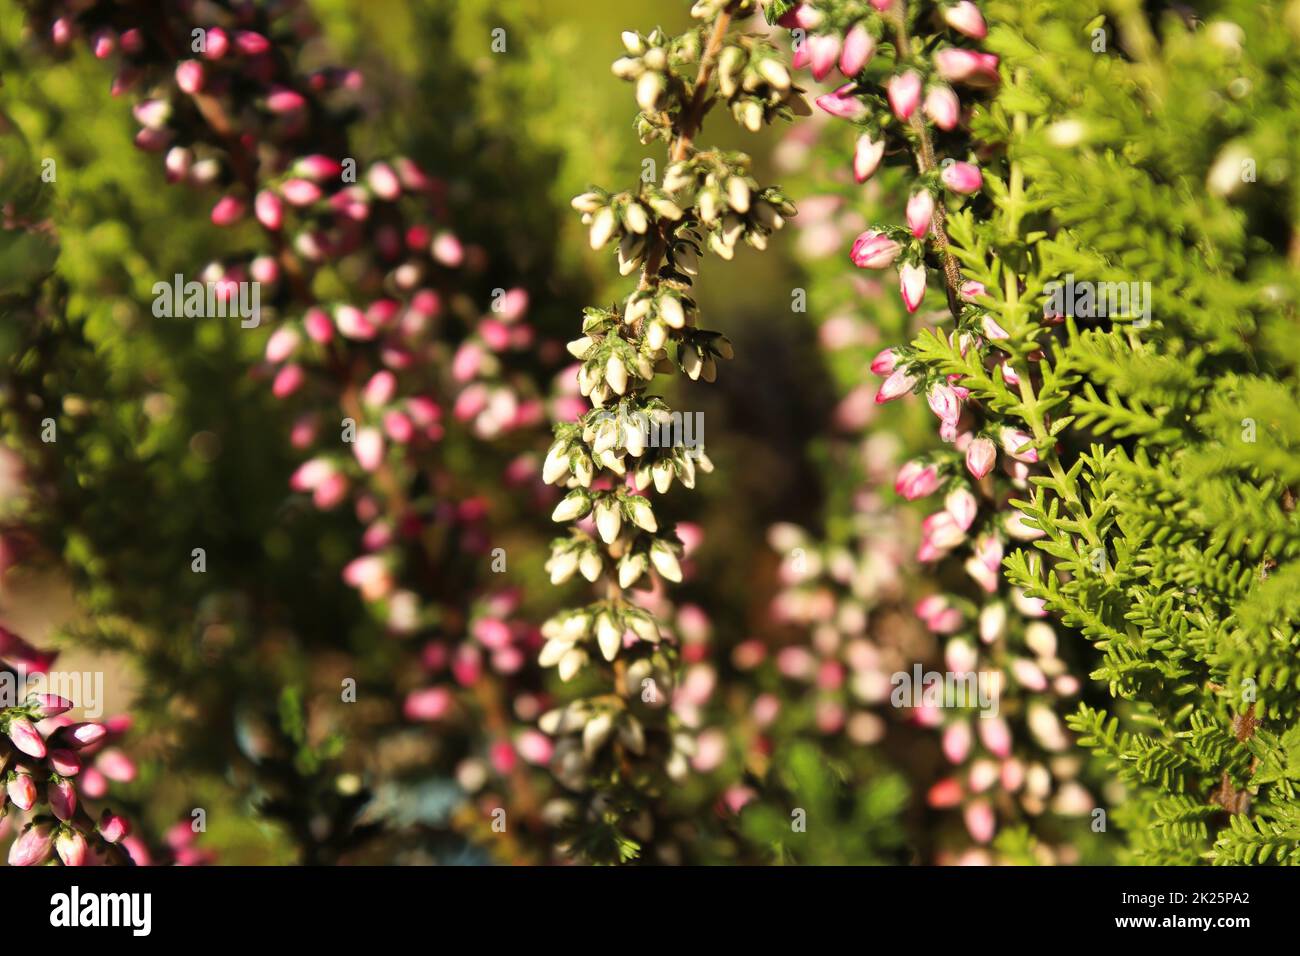 Delicate pink and white flower buds on a Heather plant Stock Photo